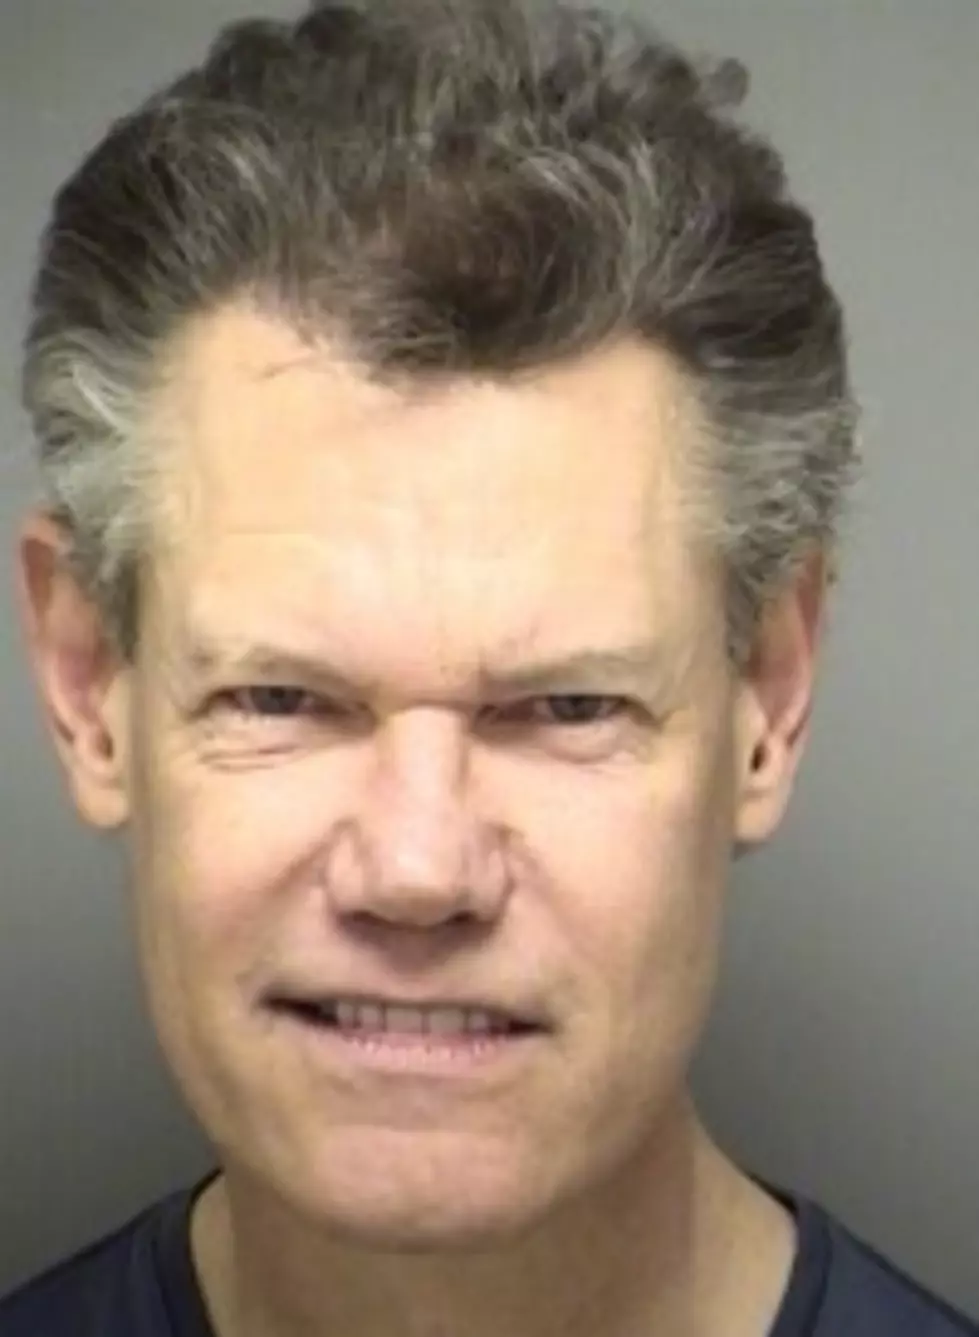 Randy Travis Arrested Near Dallas for Public Intoxication [UPDATED]